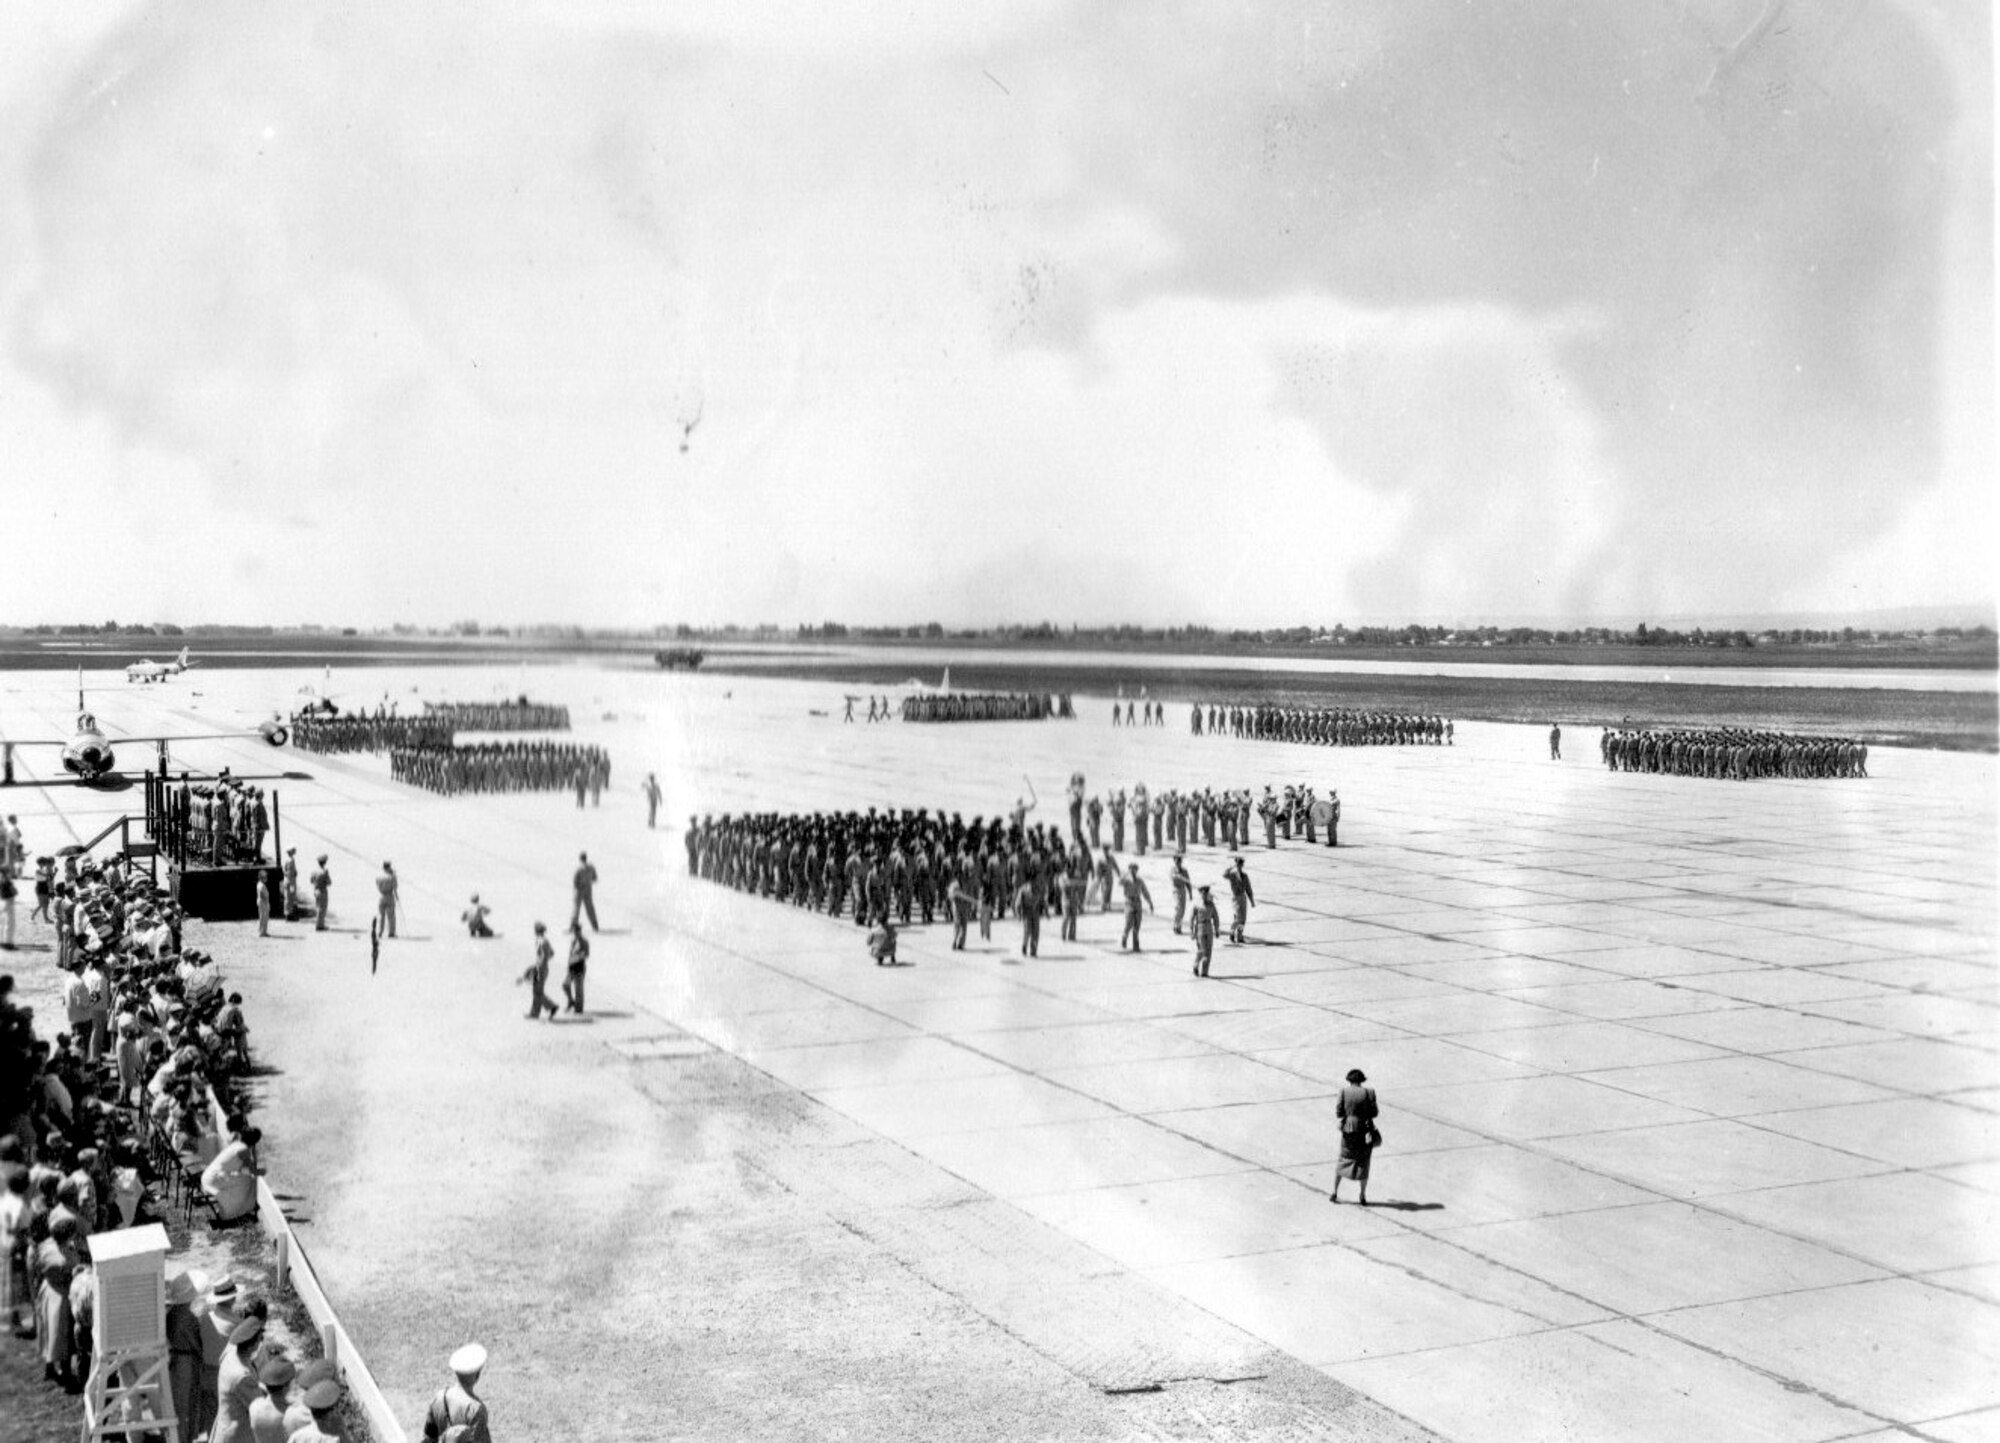 View of the members of the 142nd Fighter-Interceptor Wing on parade during Governors Day at Gowen Field, Idaho, June 23, 1954.  Note the VIP stand at the left.  Just beyond it is a Northrop F-89 Scorpion fighter-interceptor, an aircraft the Oregon ANG would begin to operate just a few years later.  (Courtesy 142FW History Archives)